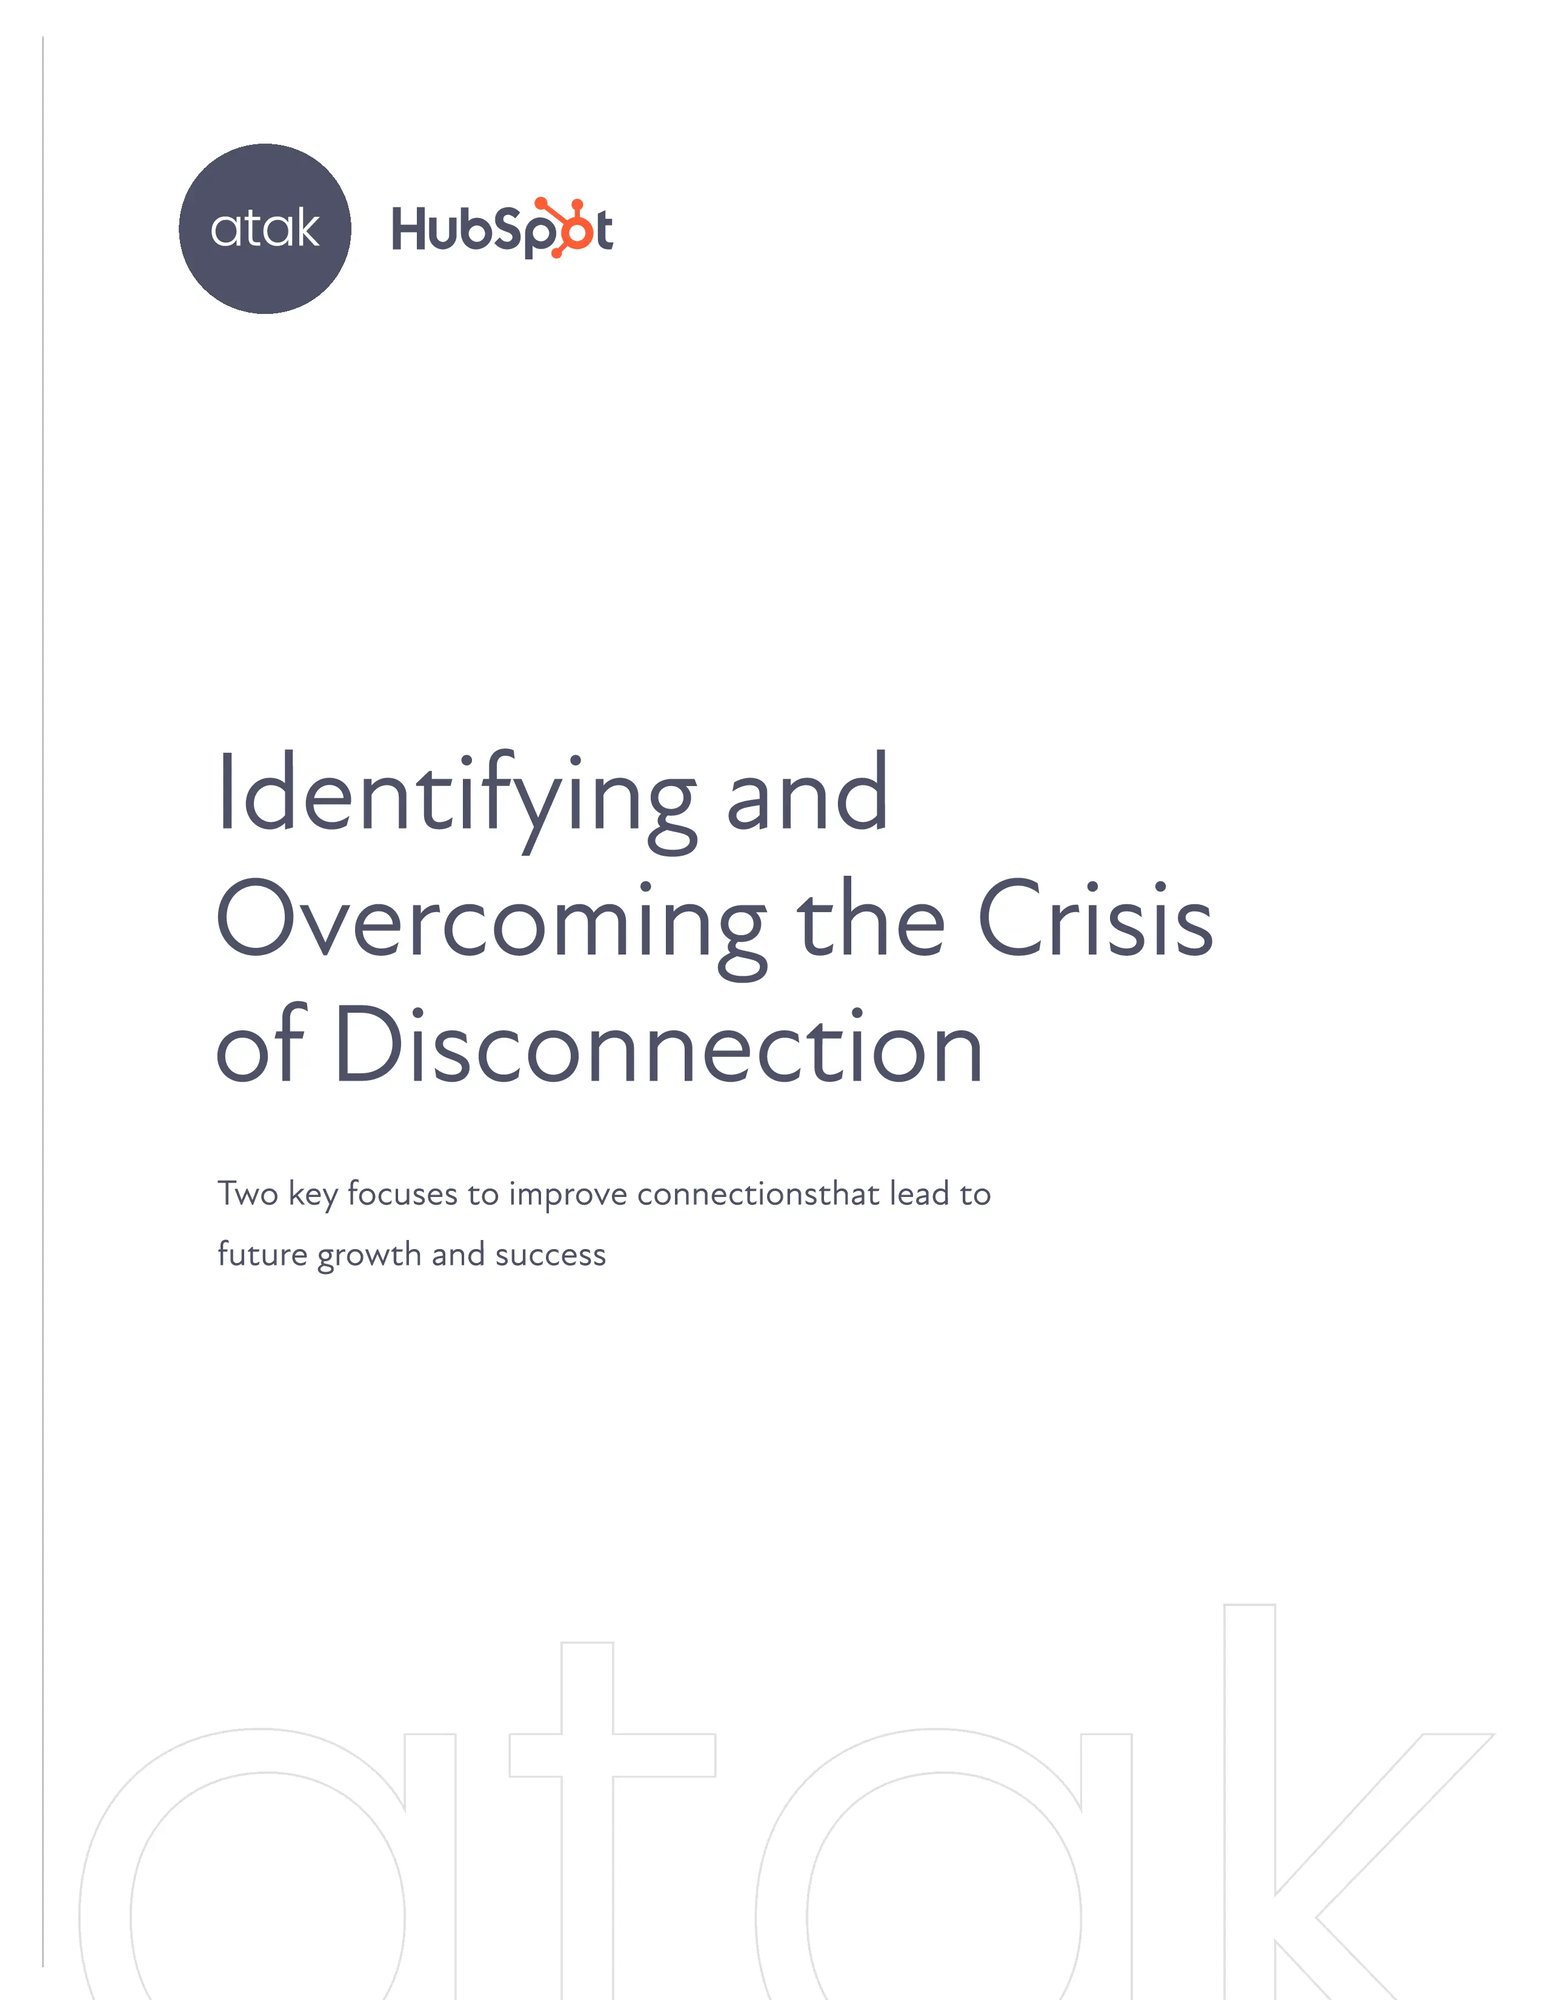 Identifying and Overcoming the Crisis of Disconnection